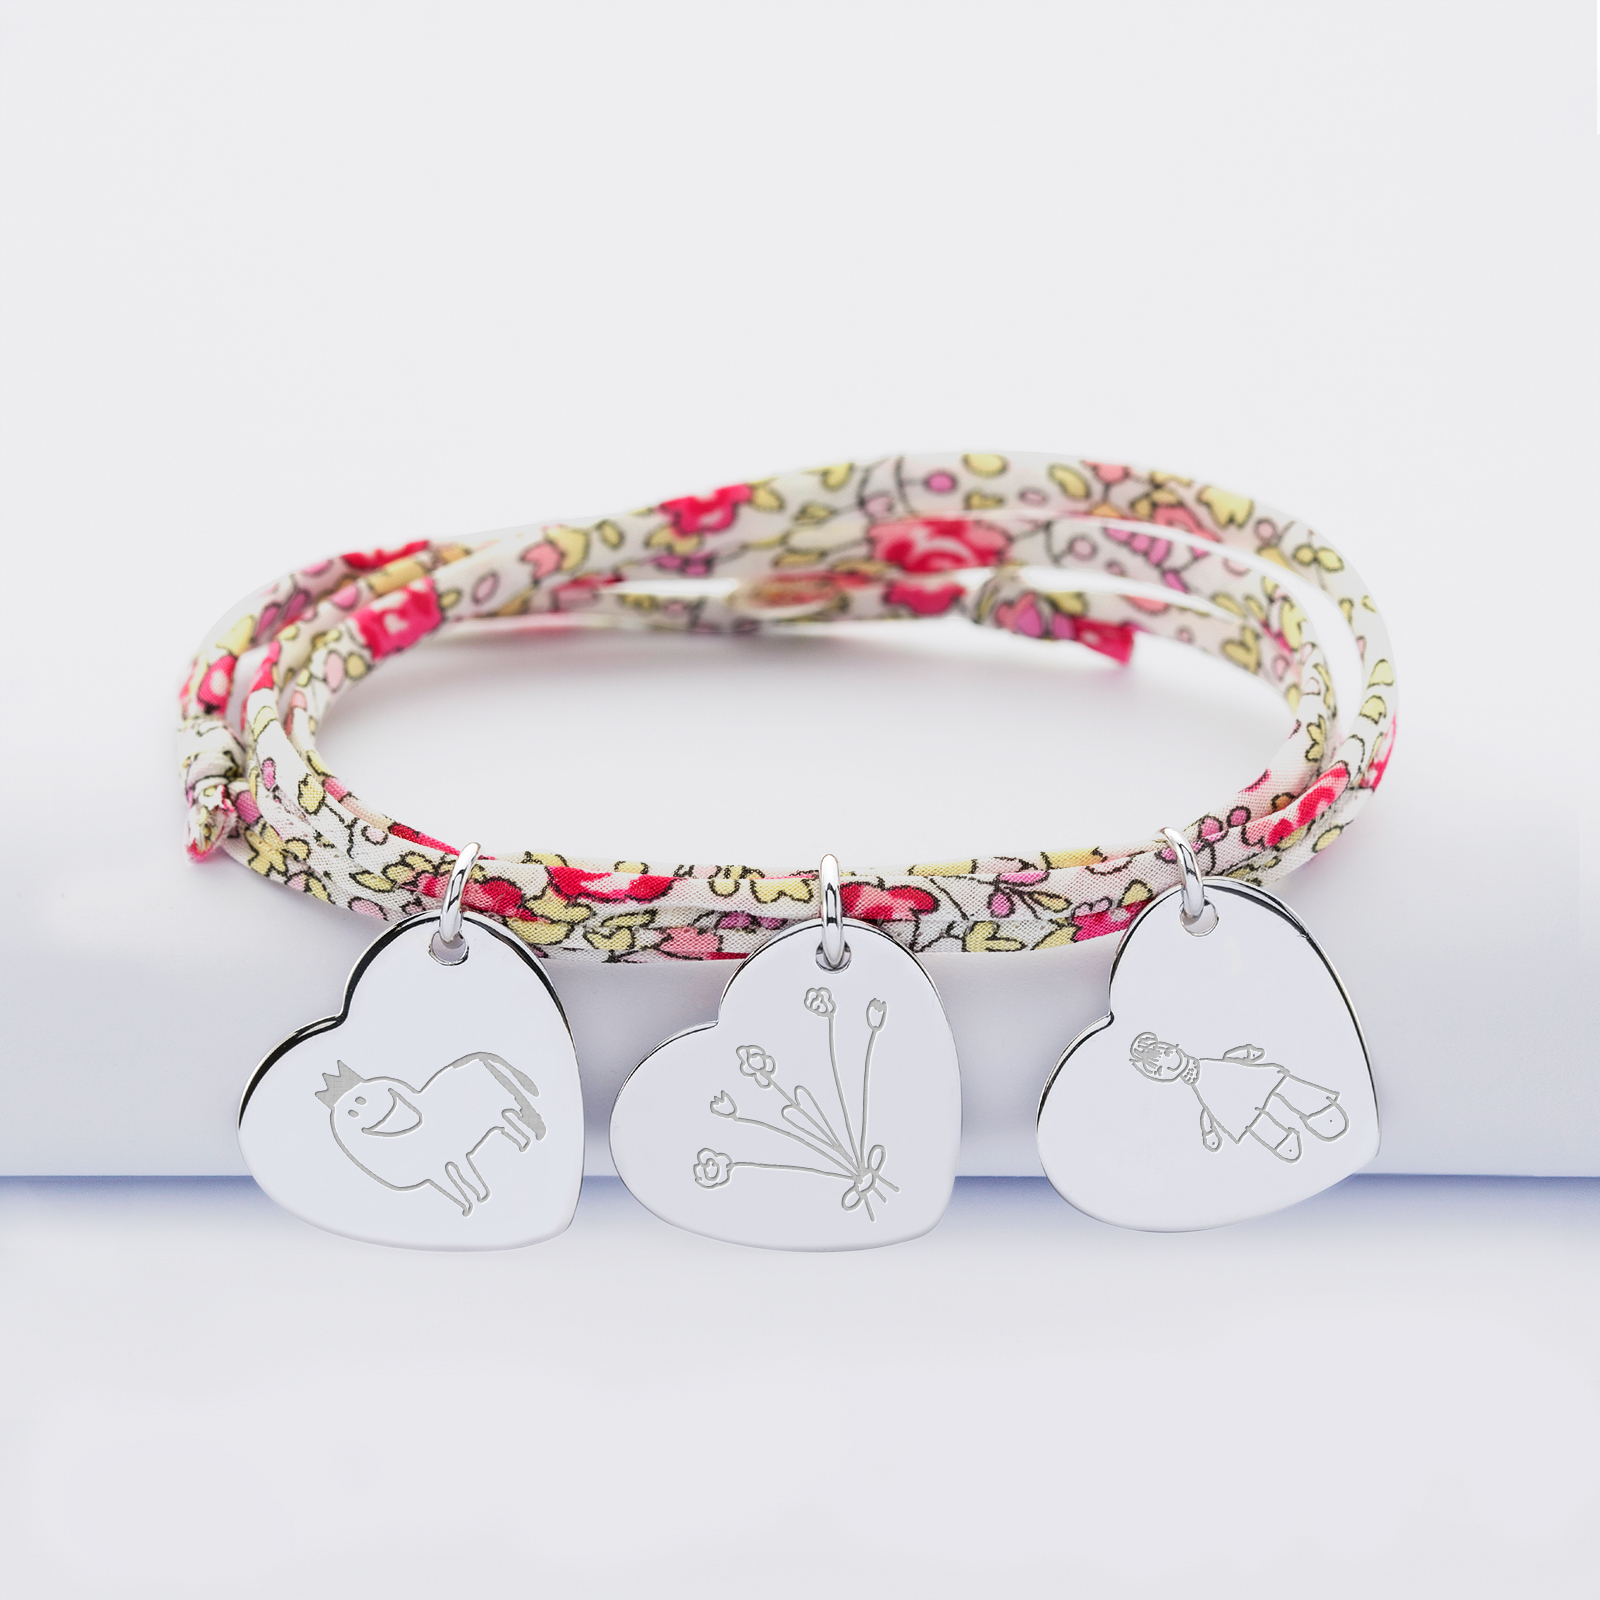 Personalised 3 turn Liberty bracelet with 3 silver engraved heart sleeper medallions 19x21mm - illustrations